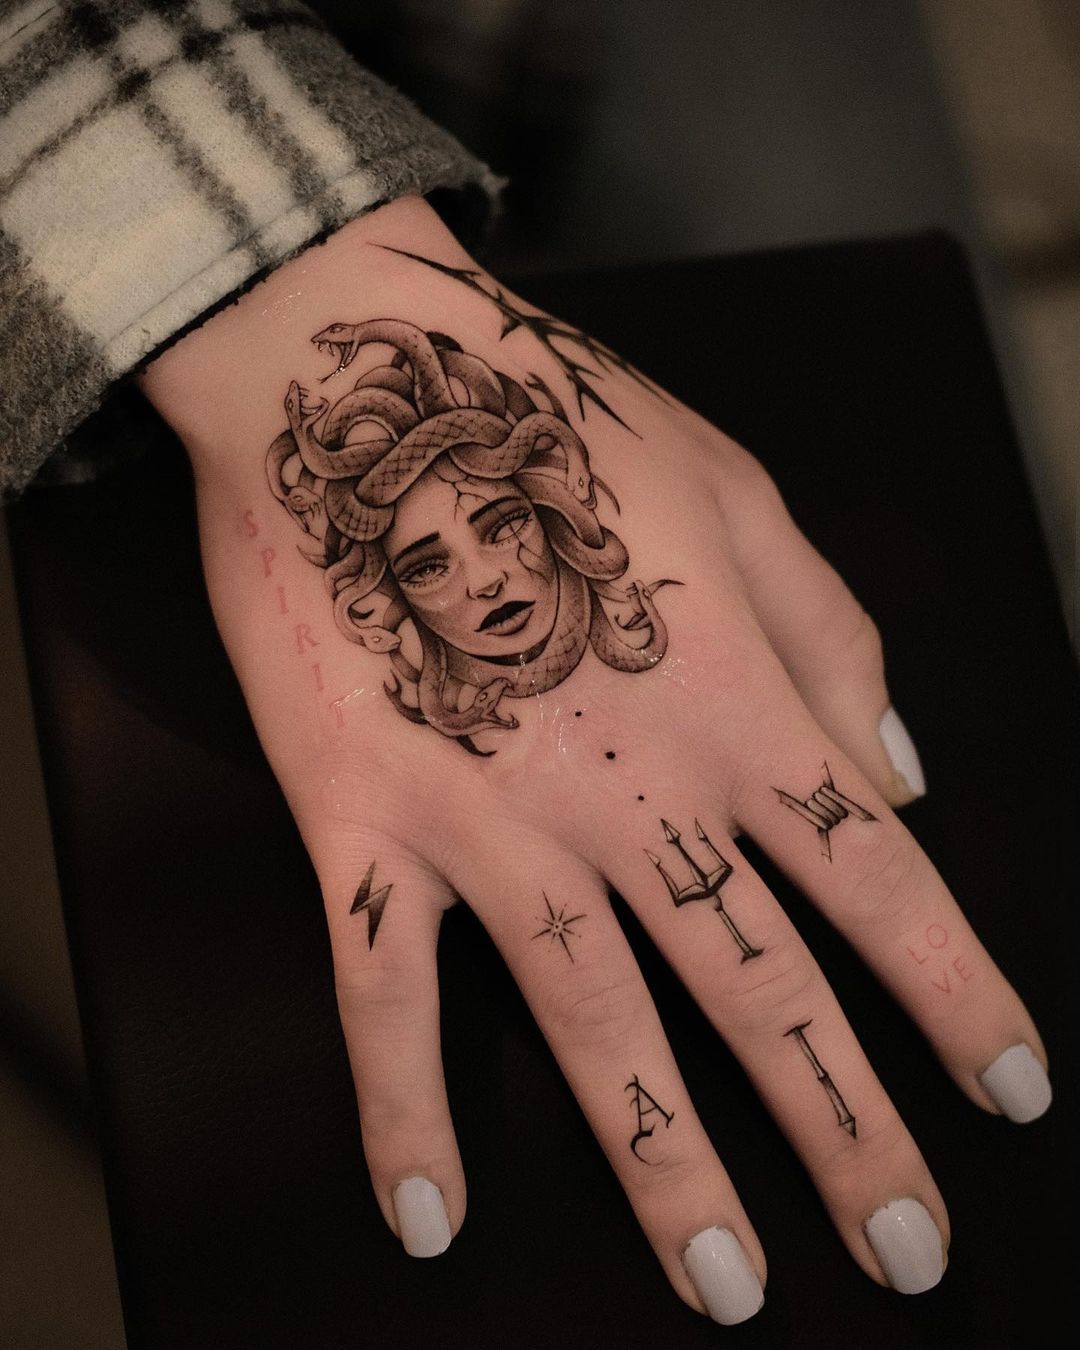 120 Medusa Tattoo Designs with Meaning | Art and Design